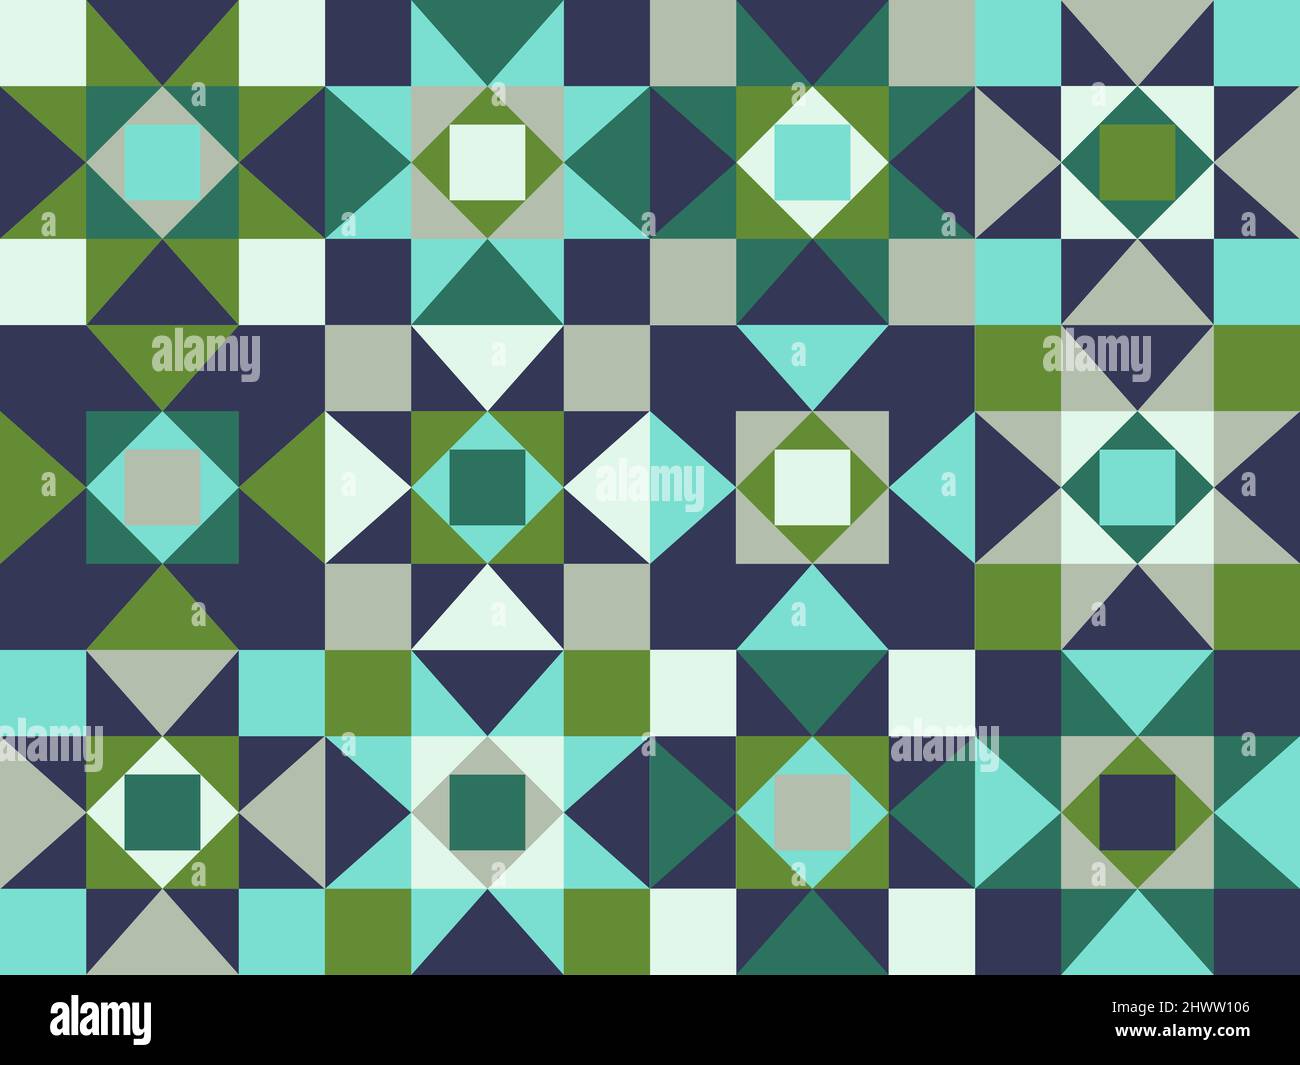 Seamless pattern with geometric motifs in 6 colors Stock Photo